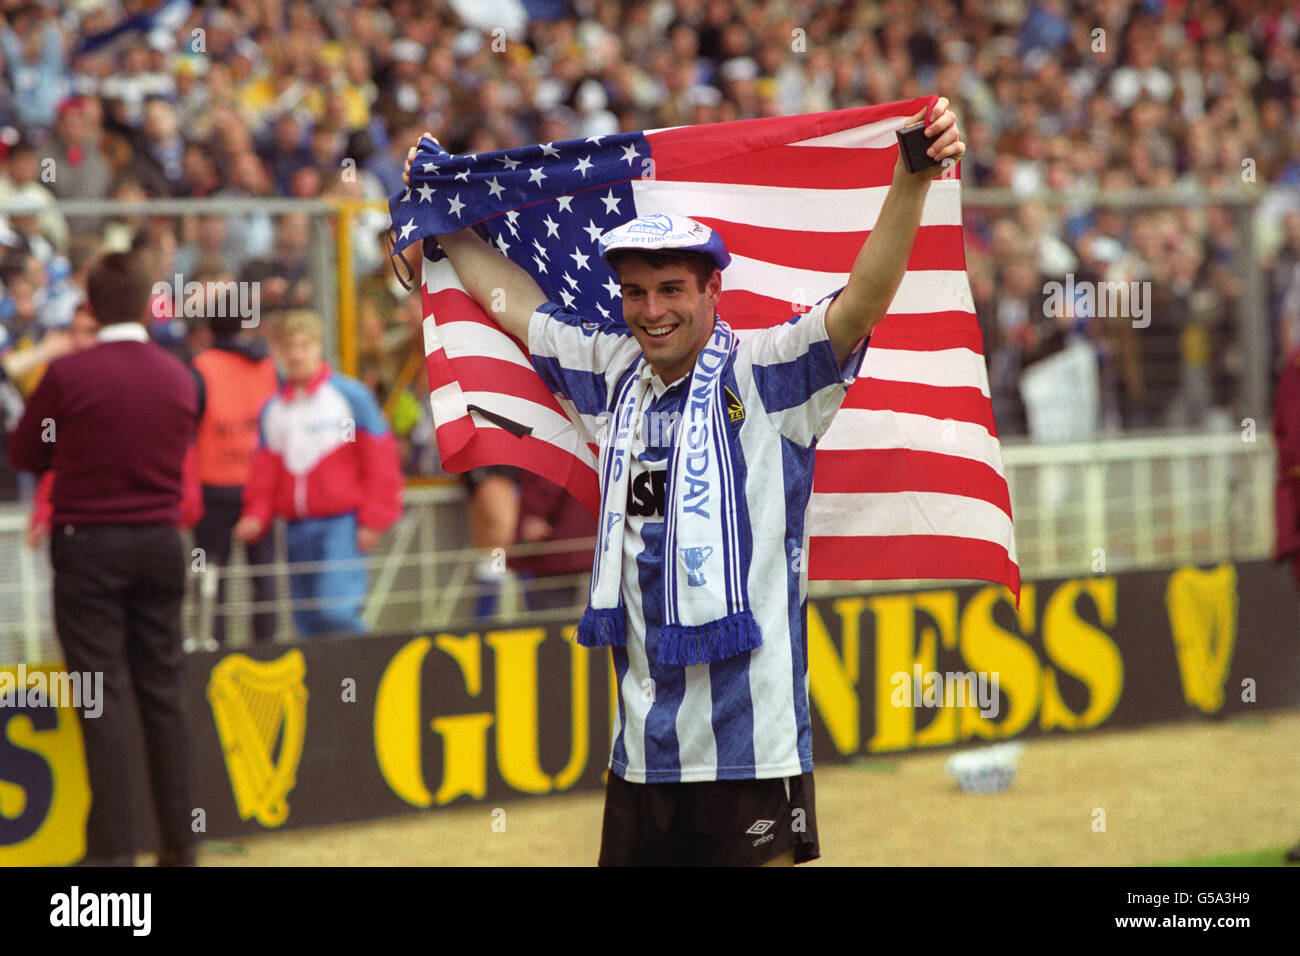 Soccer - Rumbelows Cup Final - Manchester United v Sheffield Wednesday - Wembley Stadium. Sheffield Wednesday's American player John Harkes hold the Stars and Stripes behind him in celebration. Stock Photo